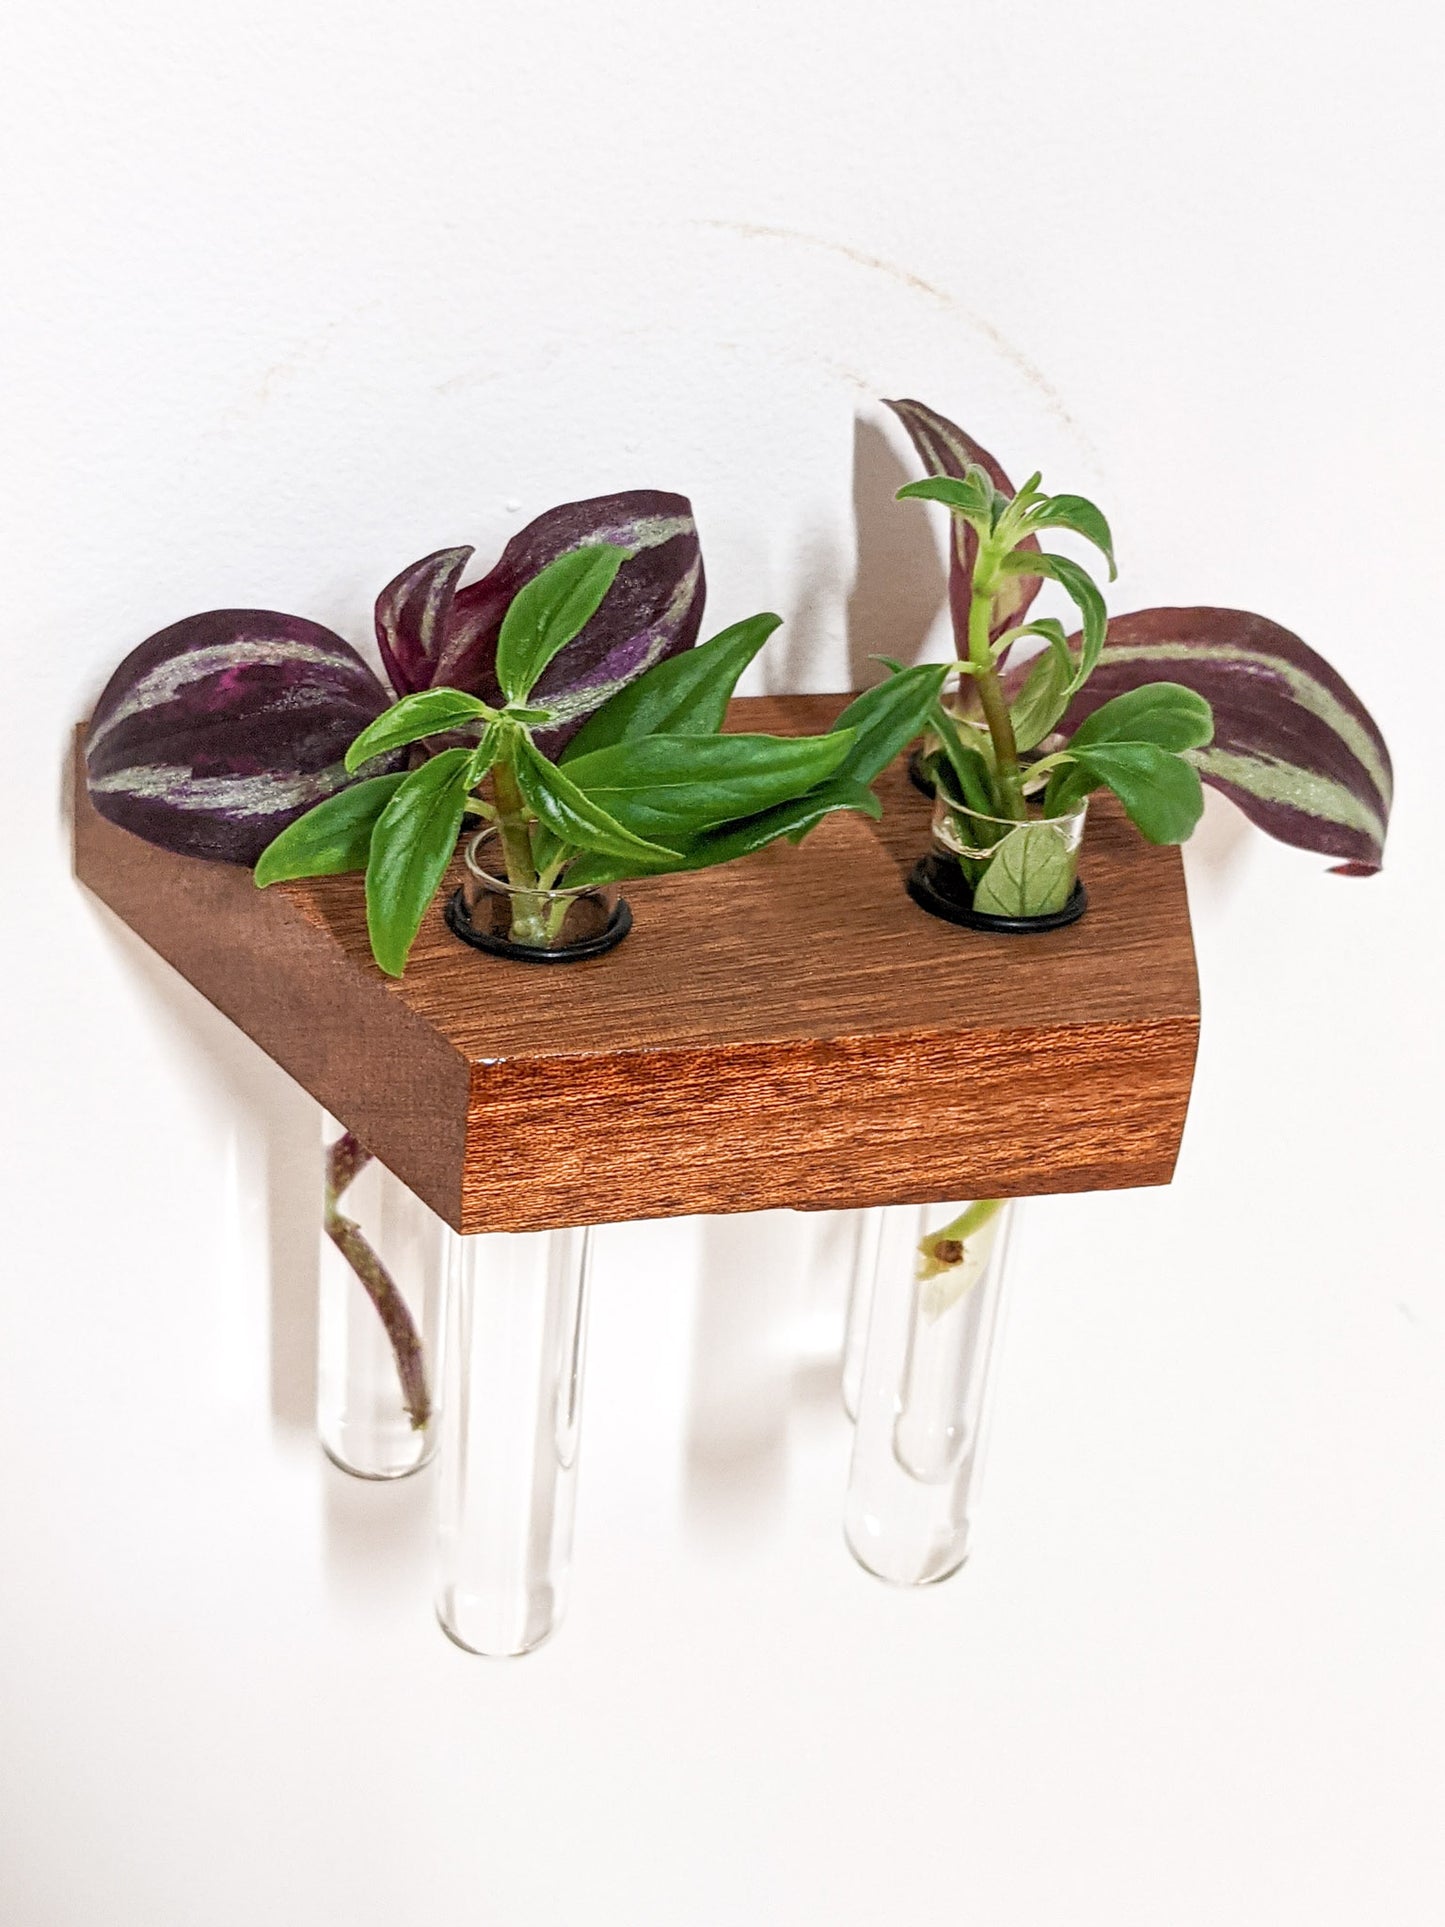 A top view of the square mahogany propagation floating shelf. Four cuttings of plants sit in four test tubes. The plants have purple and green leaves. The mahogany wood is dark brown and the edges are crisp.